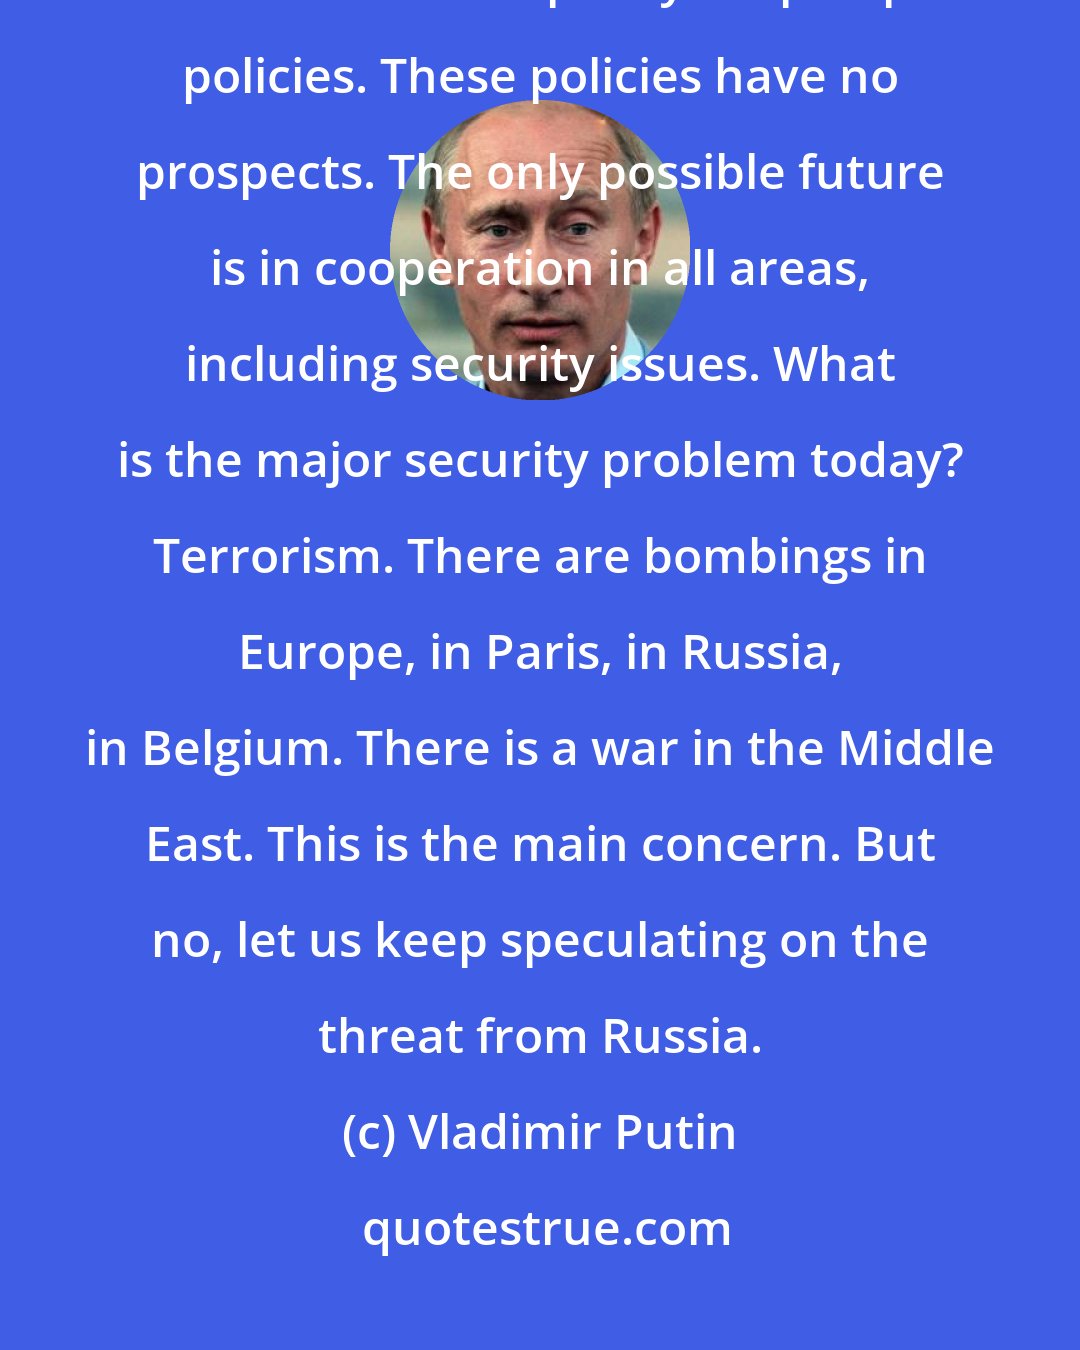 Vladimir Putin: You made these things up yourselves and now scare yourselves with them and even use them to plan your prospective policies. These policies have no prospects. The only possible future is in cooperation in all areas, including security issues. What is the major security problem today? Terrorism. There are bombings in Europe, in Paris, in Russia, in Belgium. There is a war in the Middle East. This is the main concern. But no, let us keep speculating on the threat from Russia.